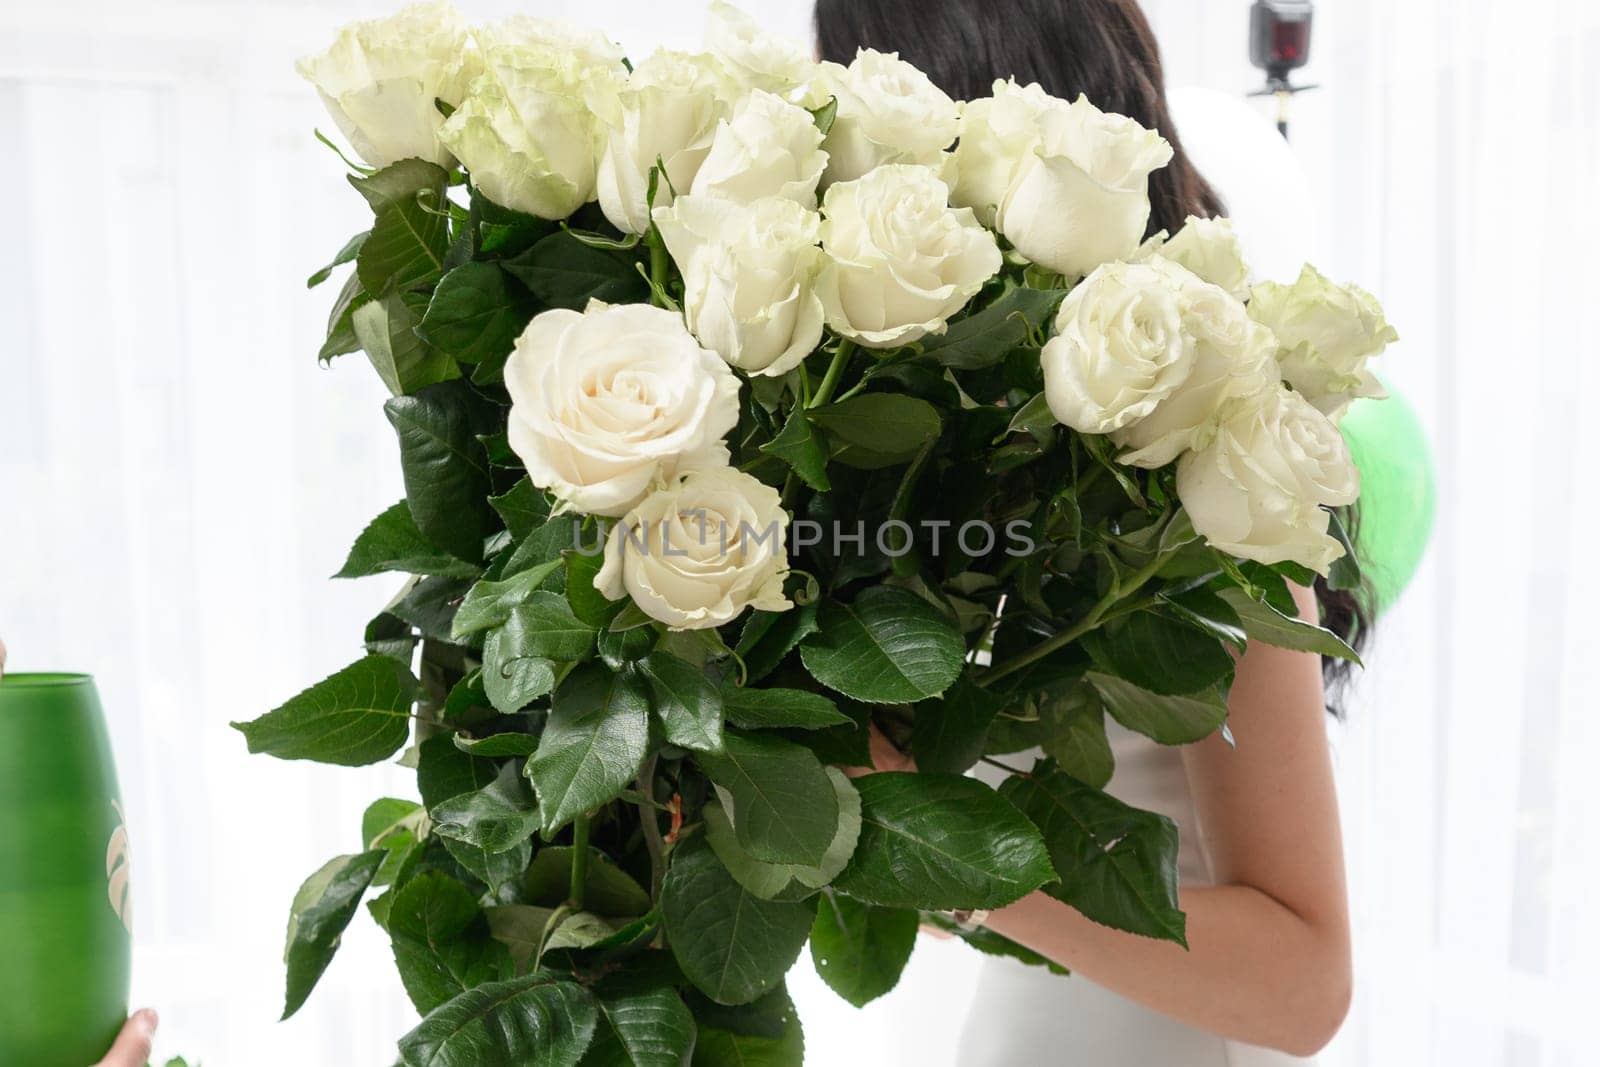 The girl is holding a large bouquet of white roses, a bouquet of fresh roses.